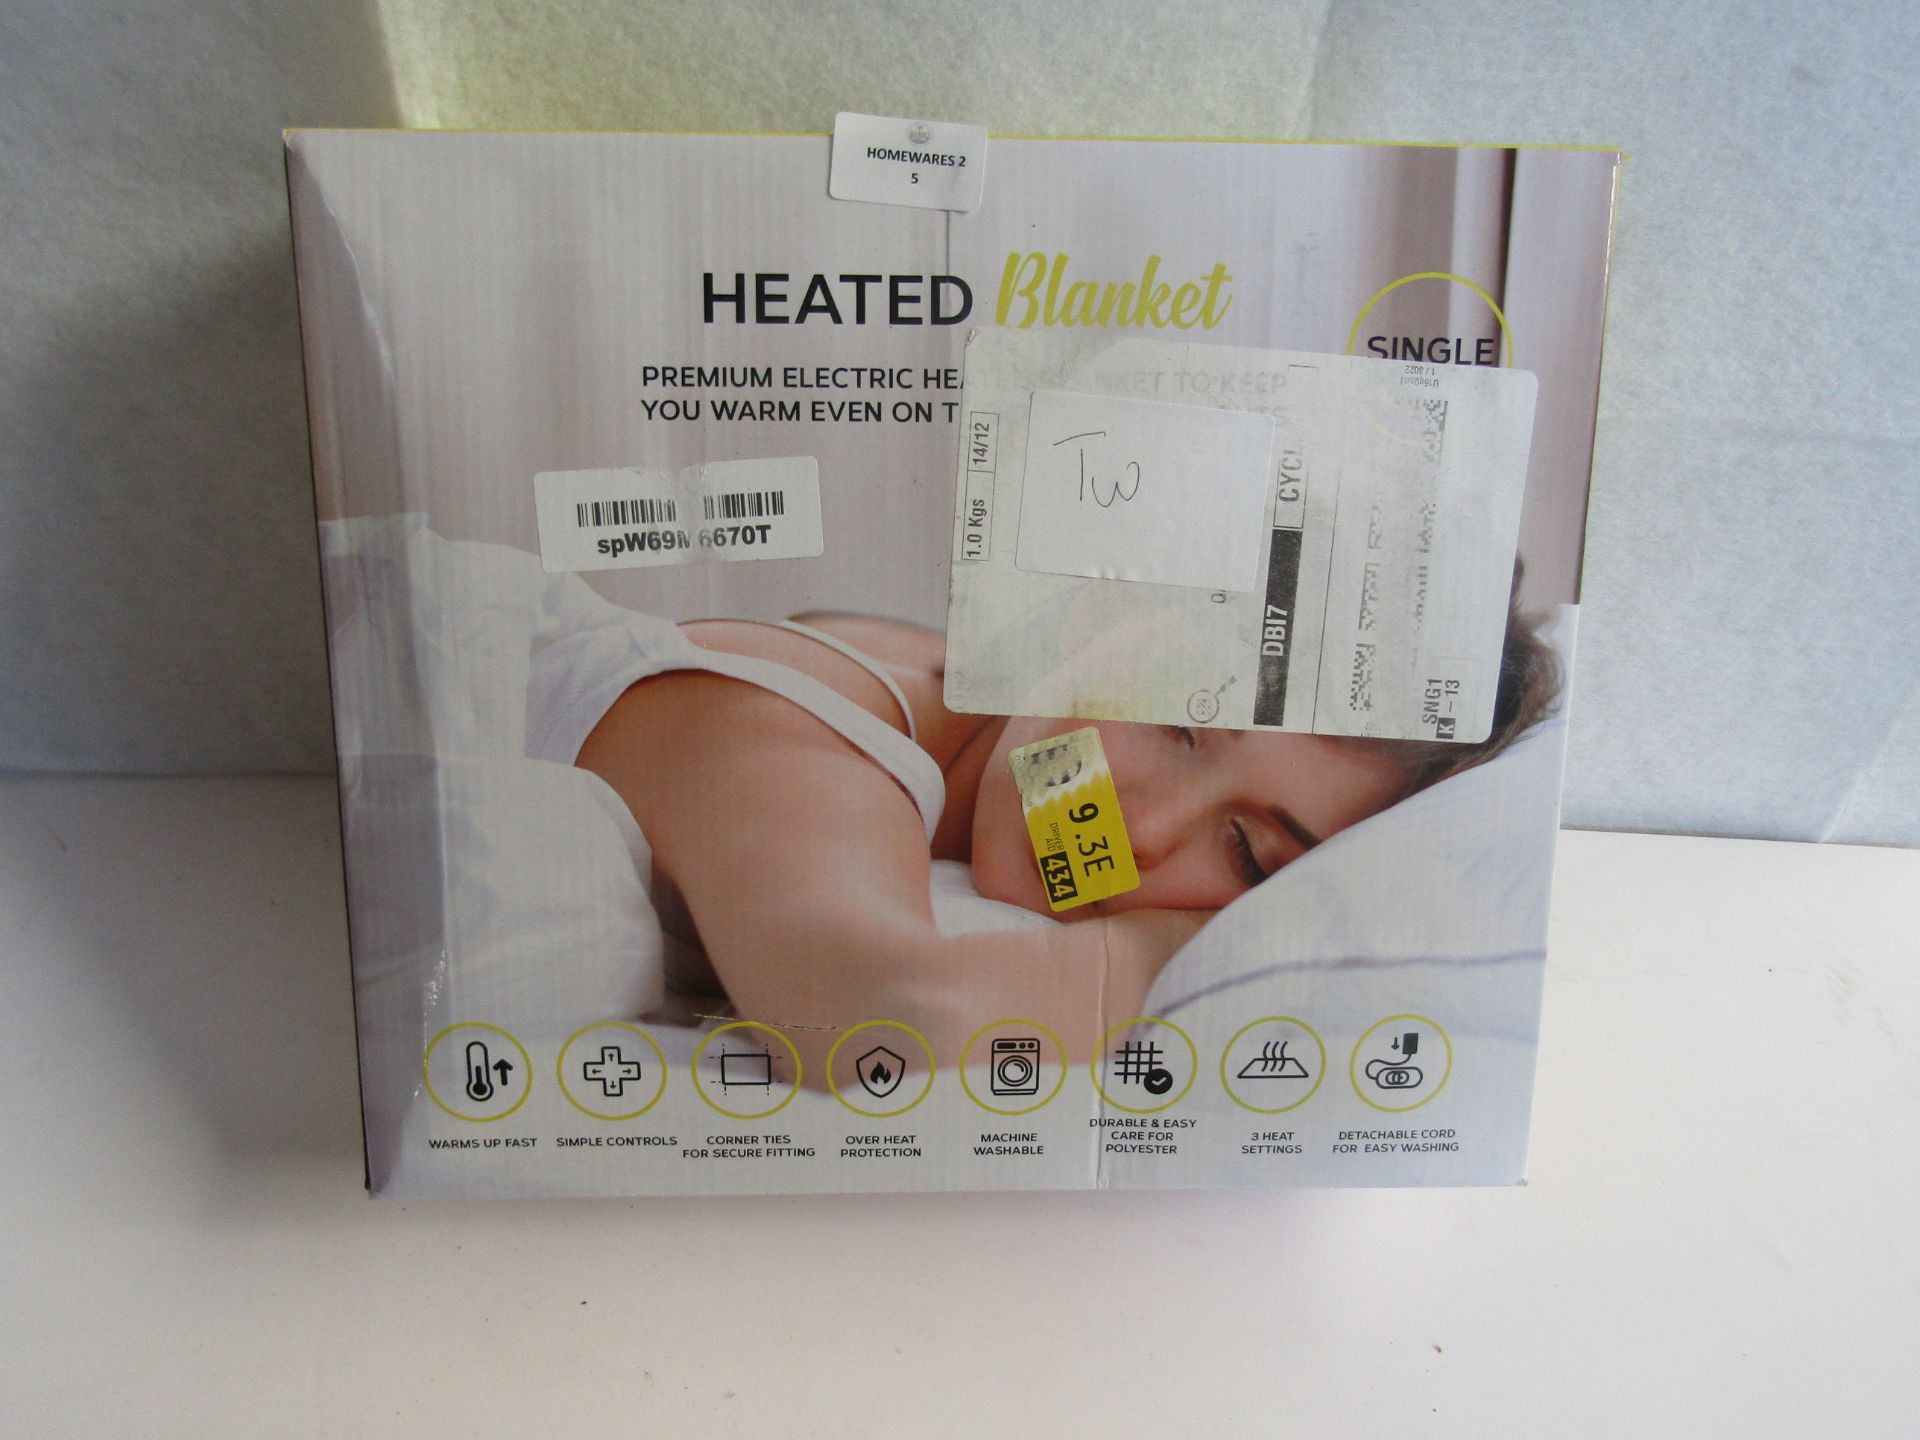 Unbranded - Electric Heated Blanket / Single - Untested & Boxed.